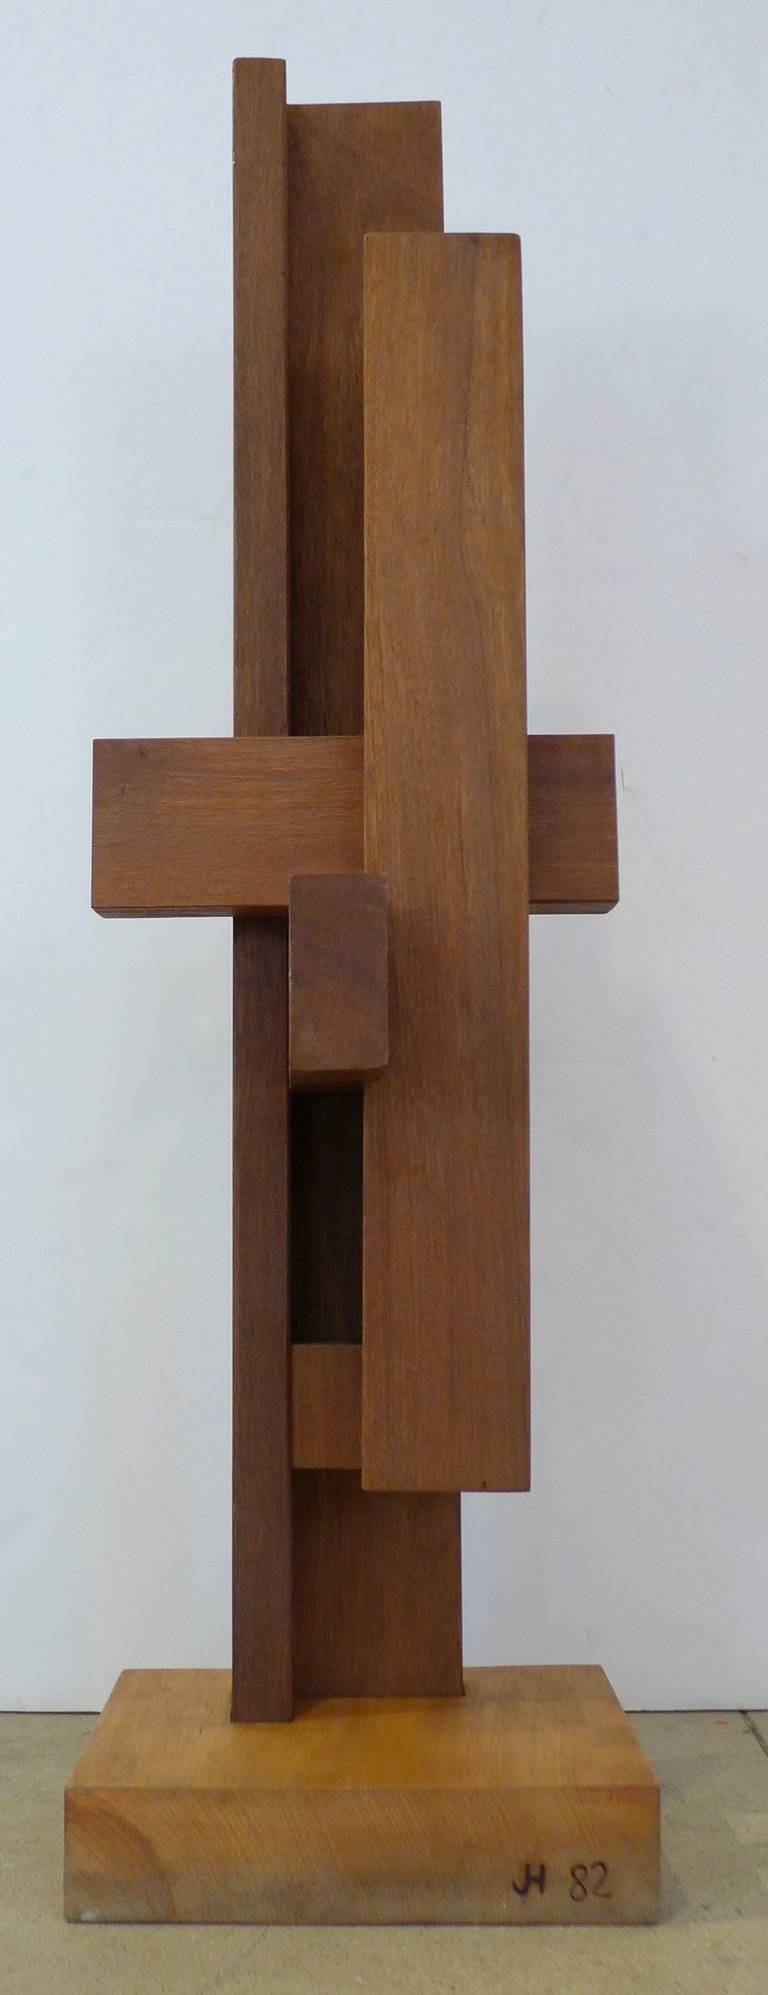 Tall constructivist sculpture of intersecting planes of wood by Dutch artist Johannes Hoog, dated 1982. A powerful and impressive work that references De Stijl architecture, tribal art, Brancusi, and Alexander Noll. A strong visual presence that can